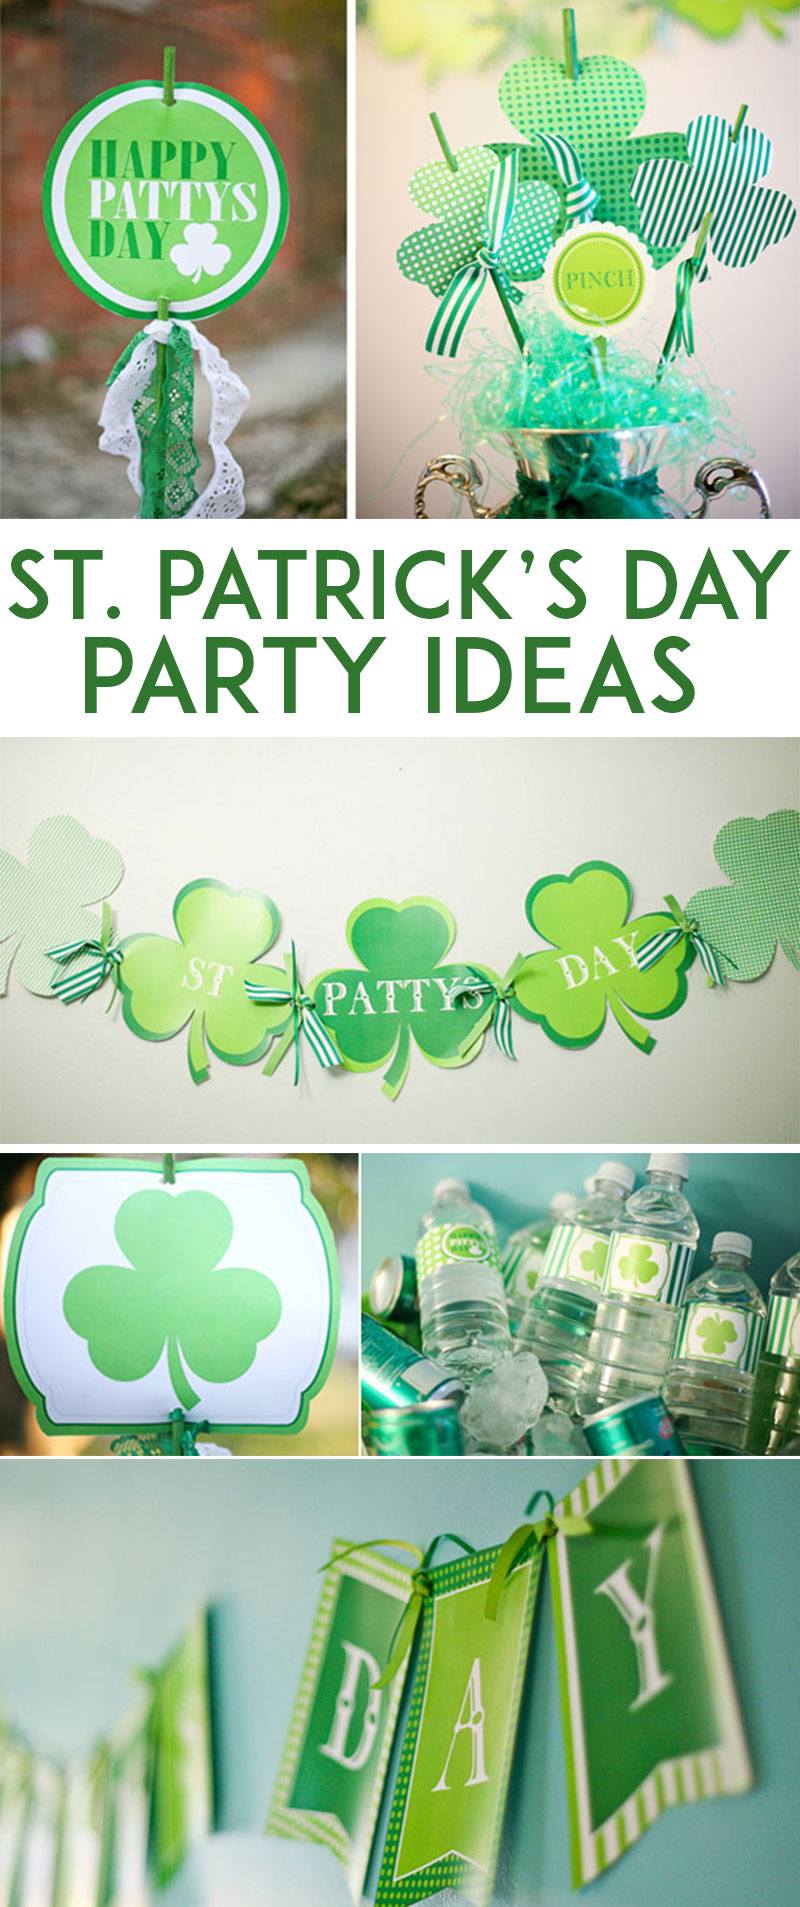 FREE St. Patrick's Day Party Printable by Love The Day